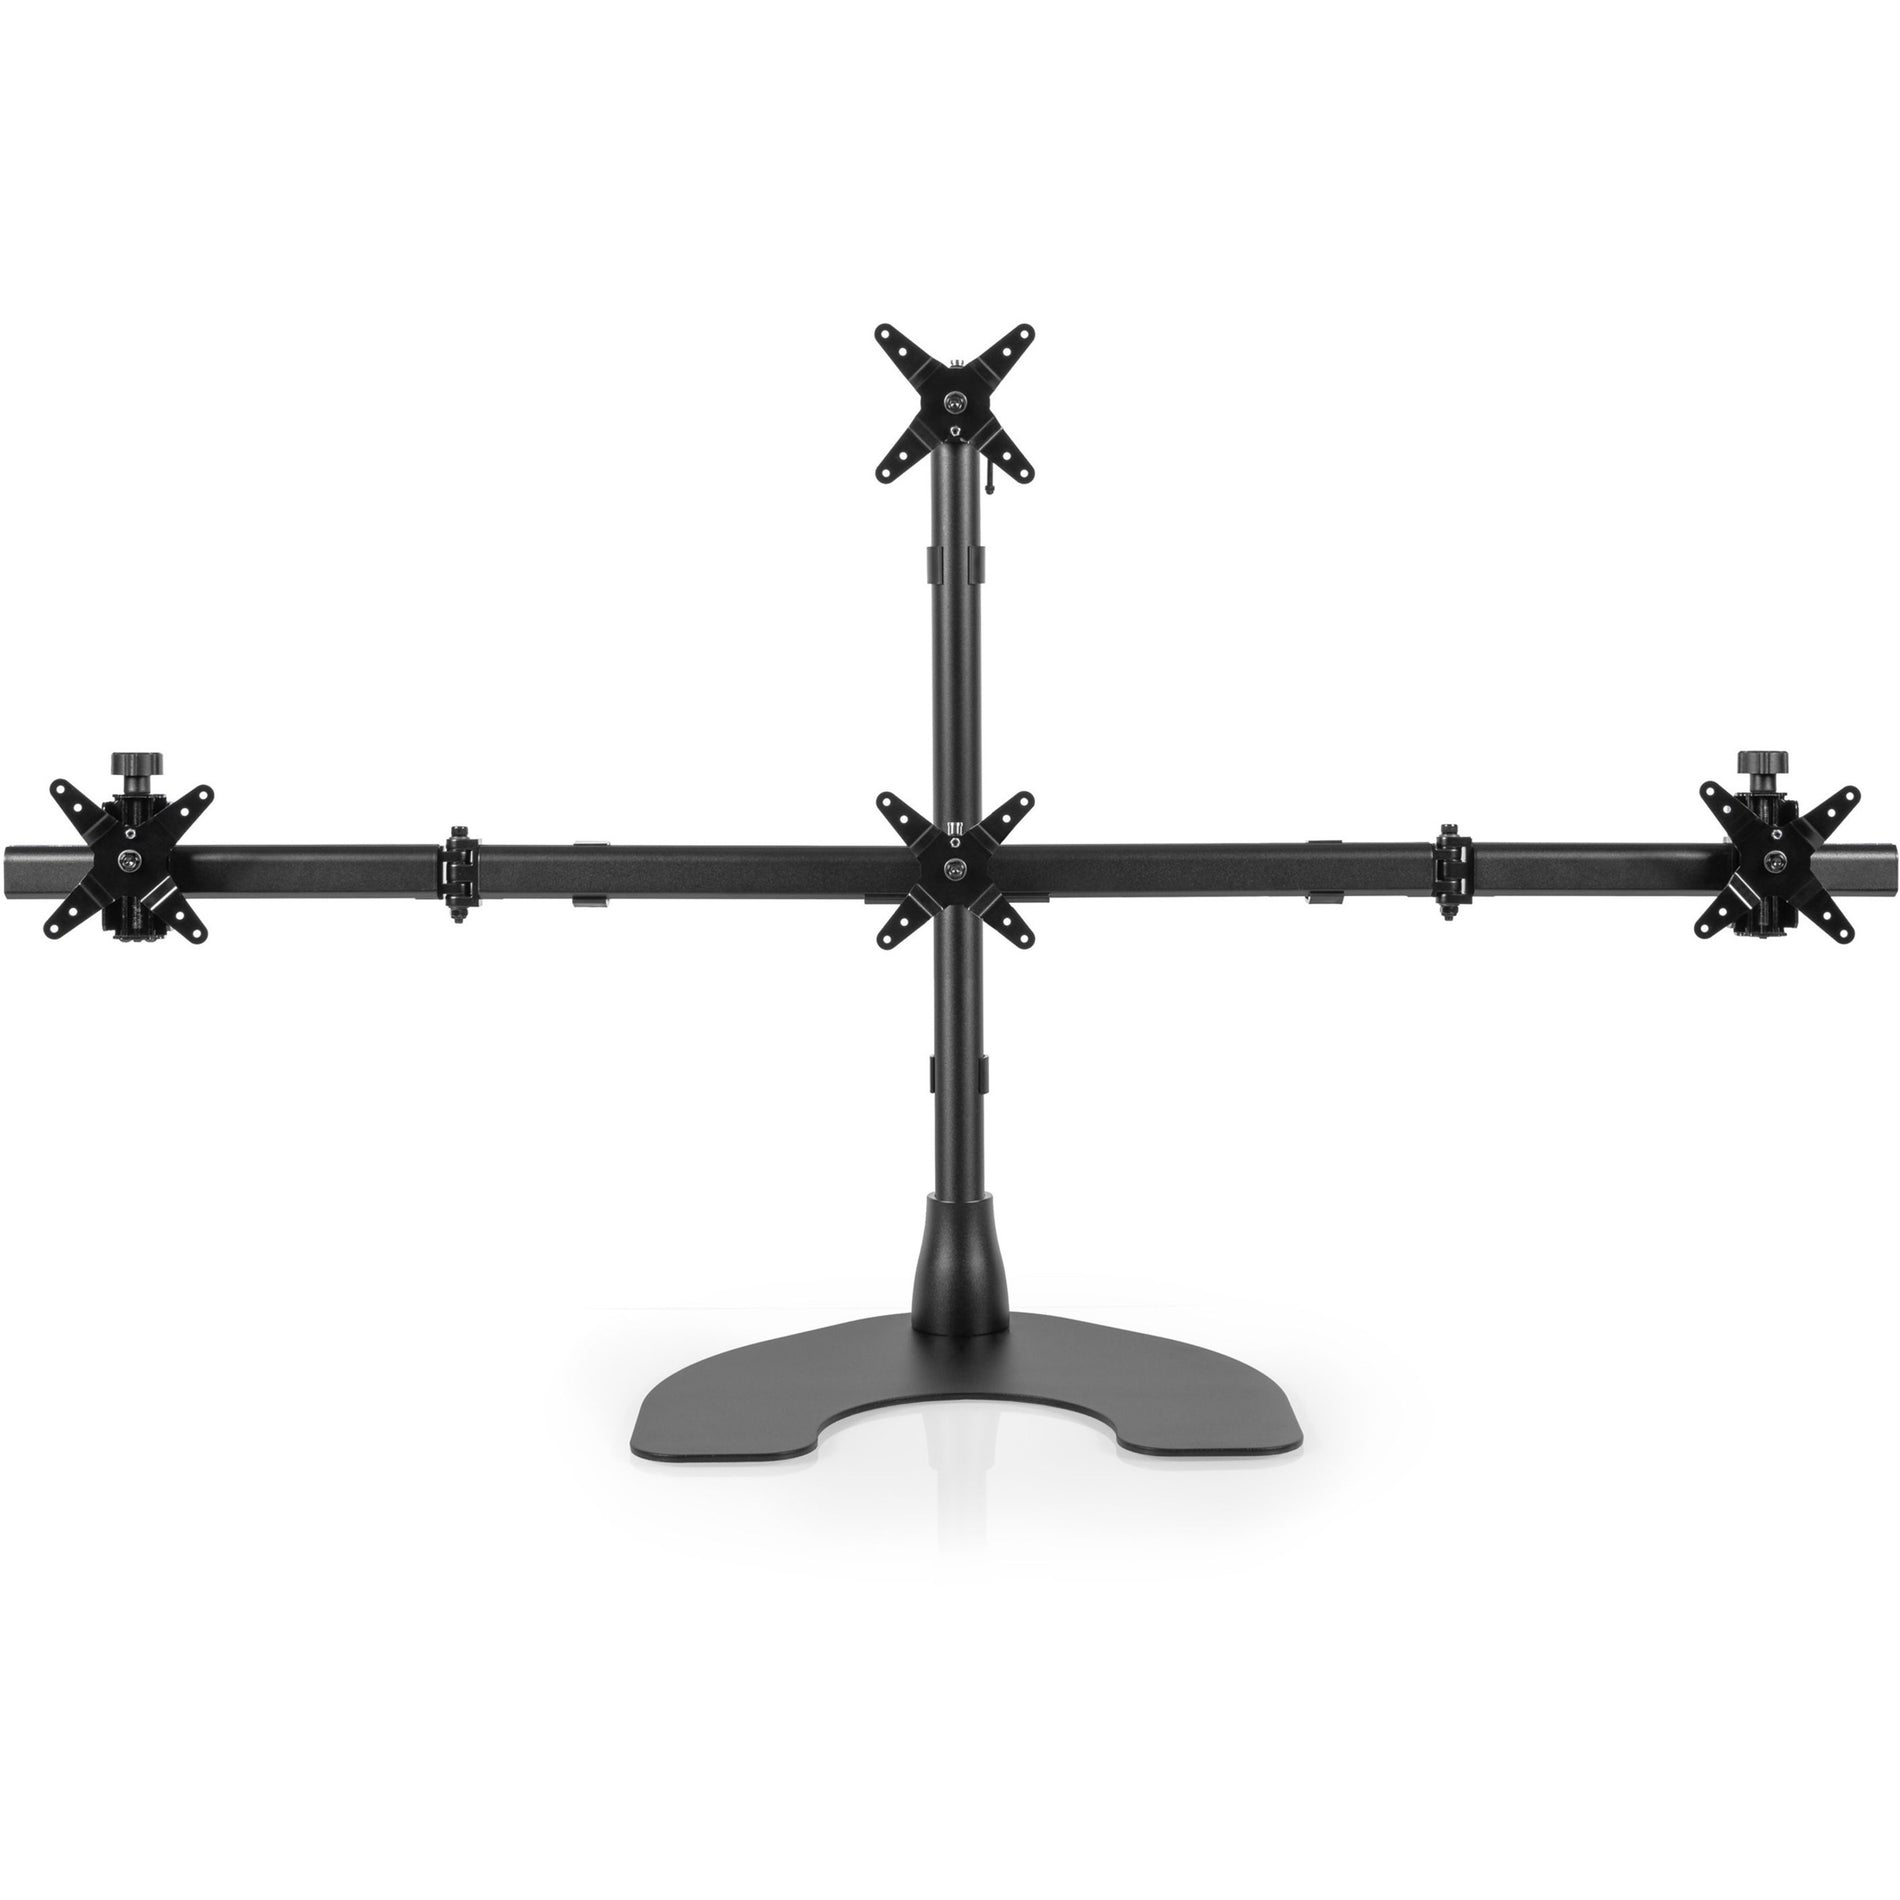 Ergotech 100-D28-B13 Quad Desk Stand, Stacked One Over Three, Multiple Viewing Angle, Rotate, Tilt, Pivot, Quick Release Mechanism, Swivel, Heavy Duty, Lightweight